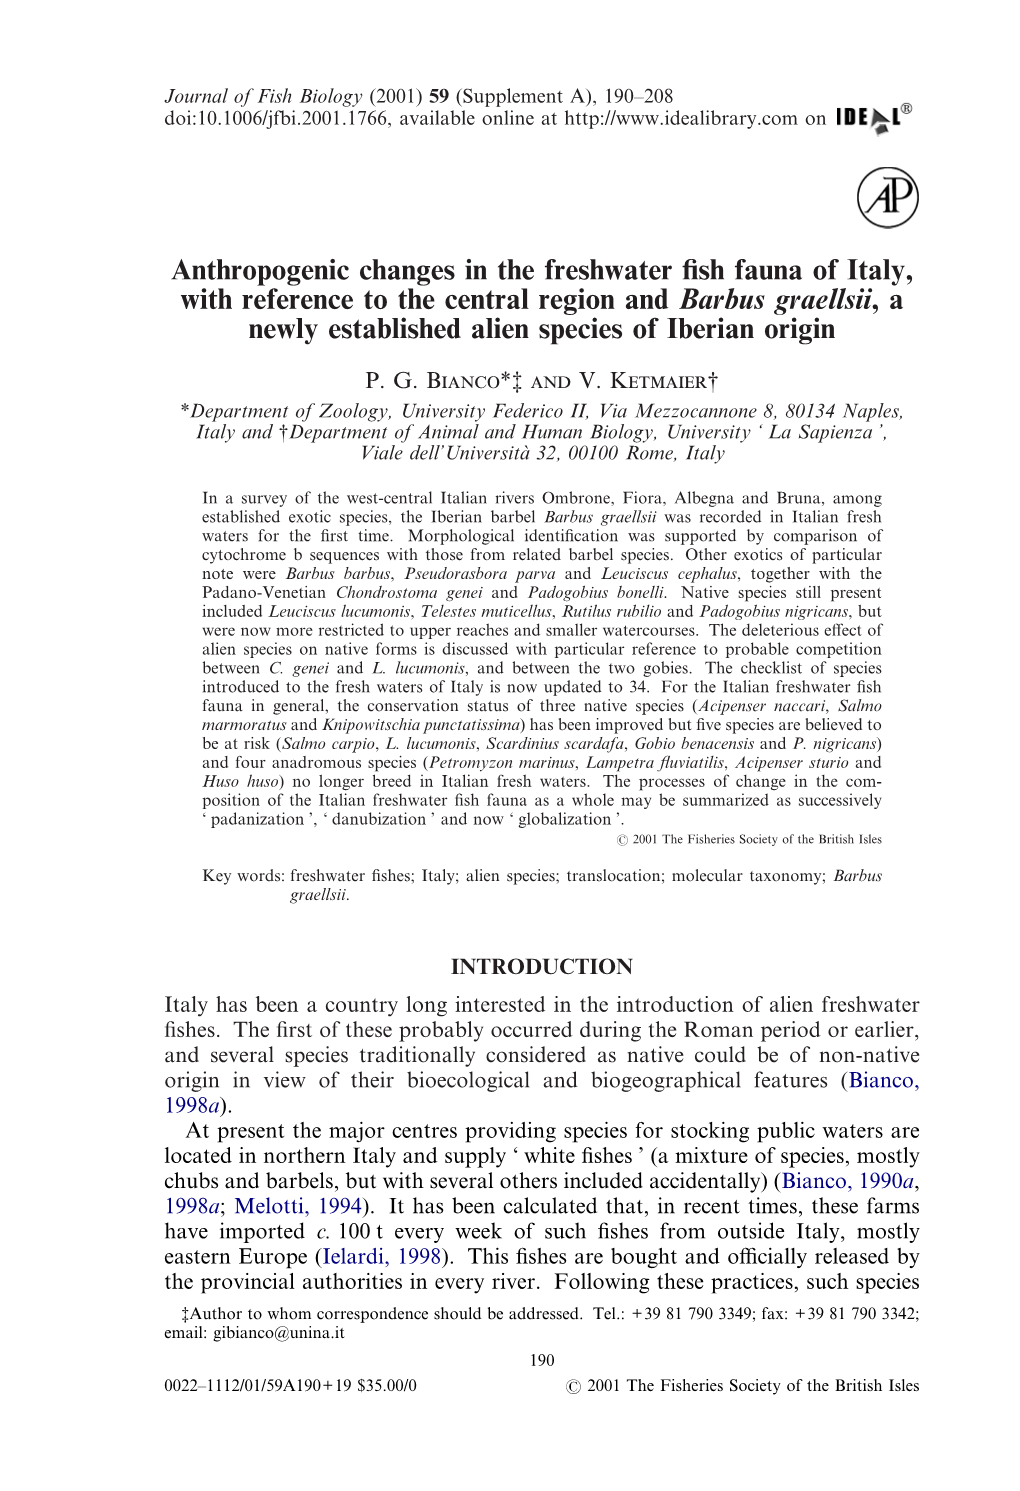 Anthropogenic Changes in the Freshwater Fish Fauna of Italy, With